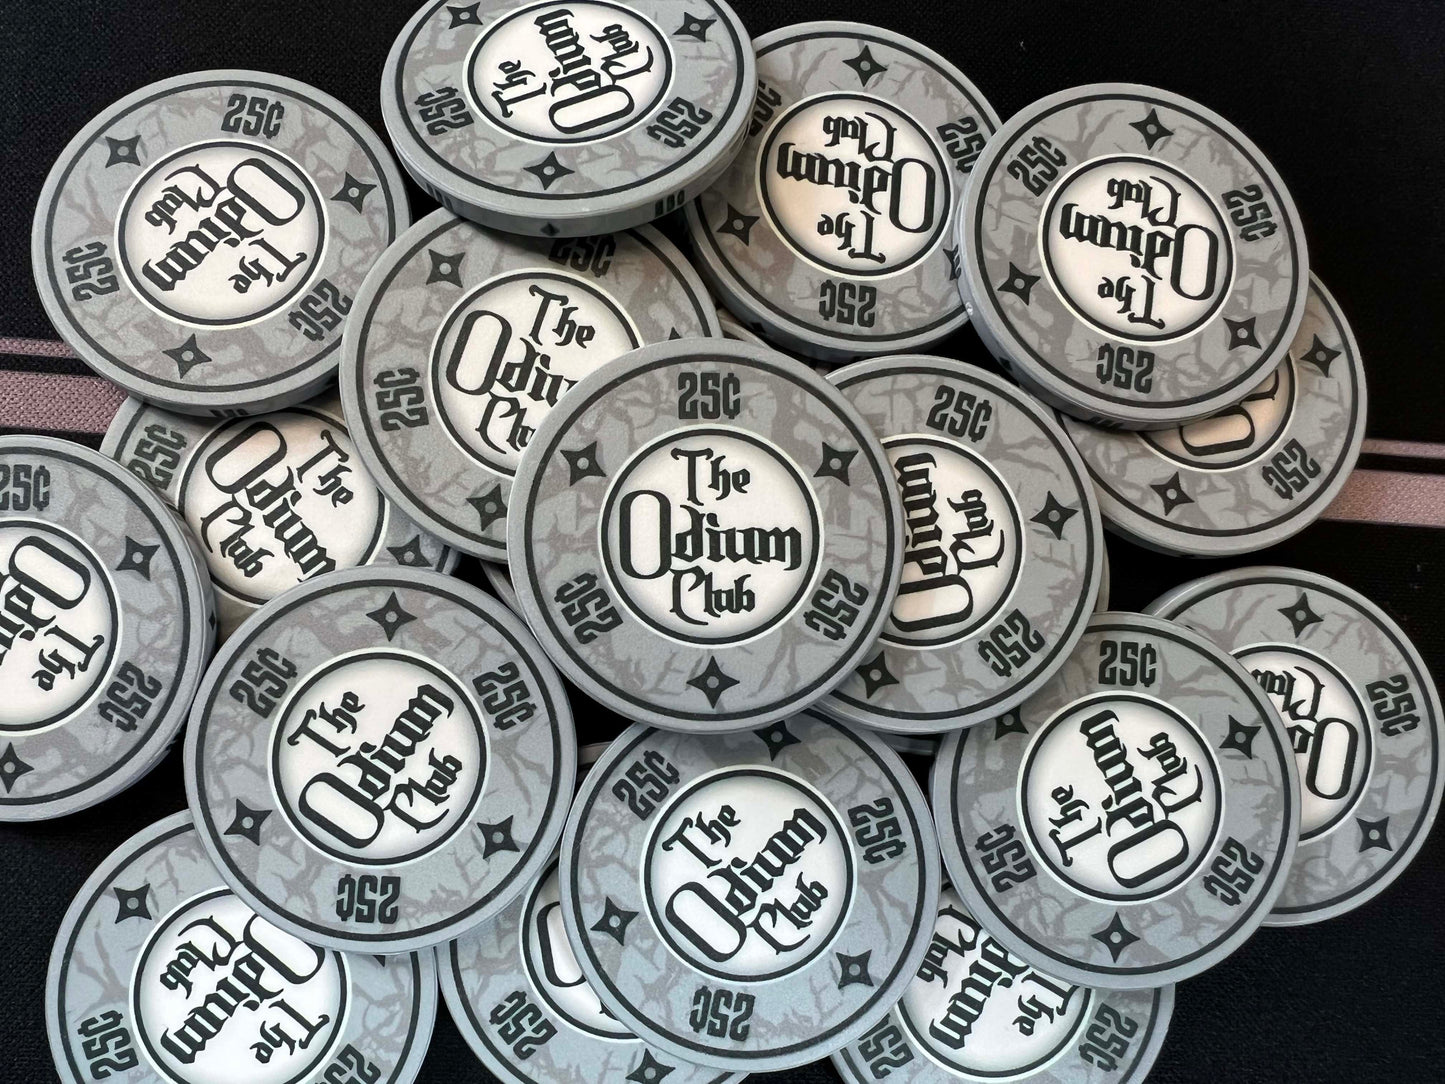 Shown here are the Odium Club 25 cent gray poker chips in a poker chip pot. These are 39mm chips (actually closer to 40mm), USA size poker chips. They are the traditional poker chip thickness of 3.3mm or 0.13 inches. Whether you're just getting started in poker and need quarter chips for playing penny stakes...or whether you're a pro poker player, these chips will get your poker game started off right.